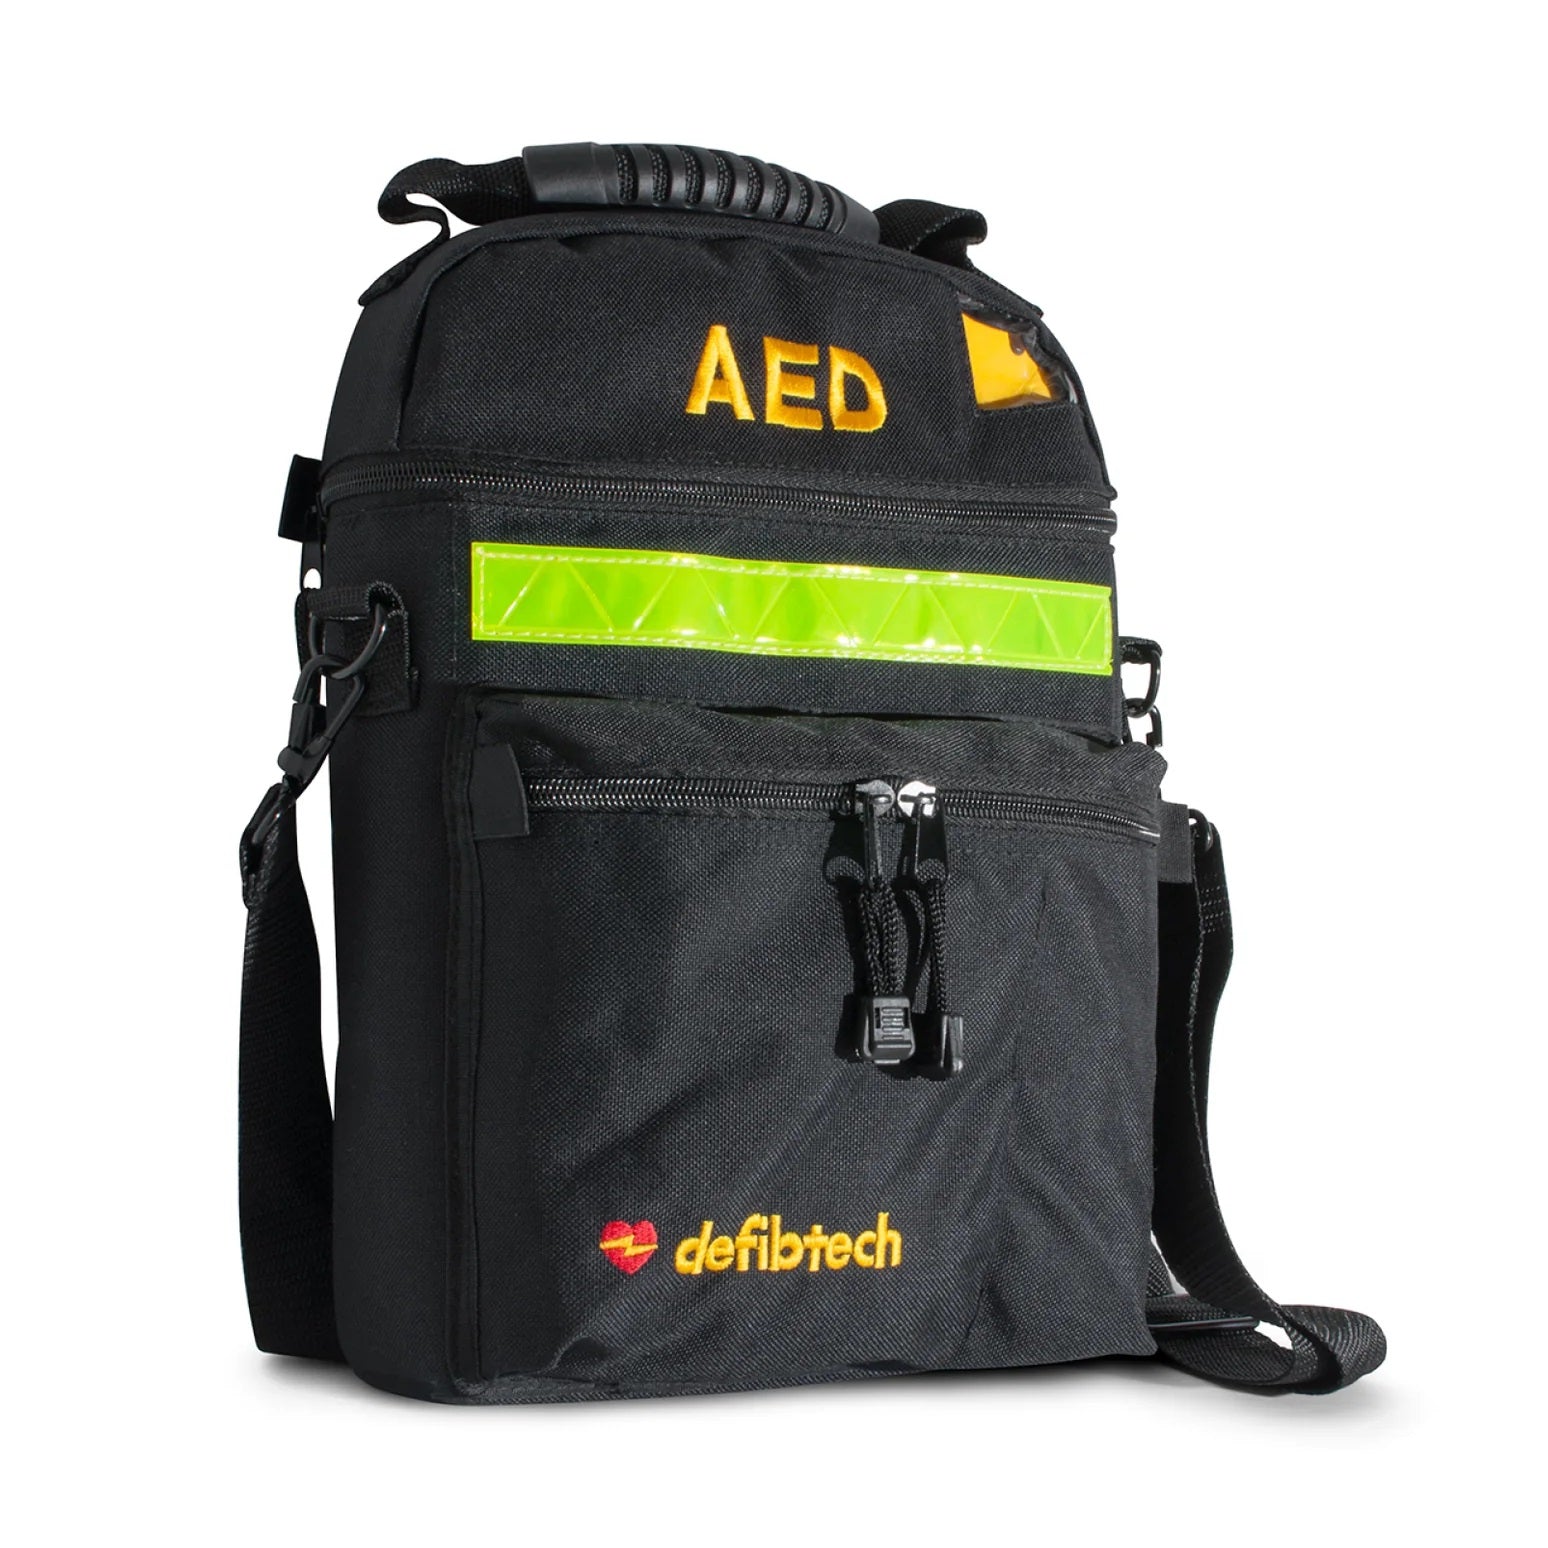 Defibtech Lifeline AED Soft Carry Case | All Security Equipment